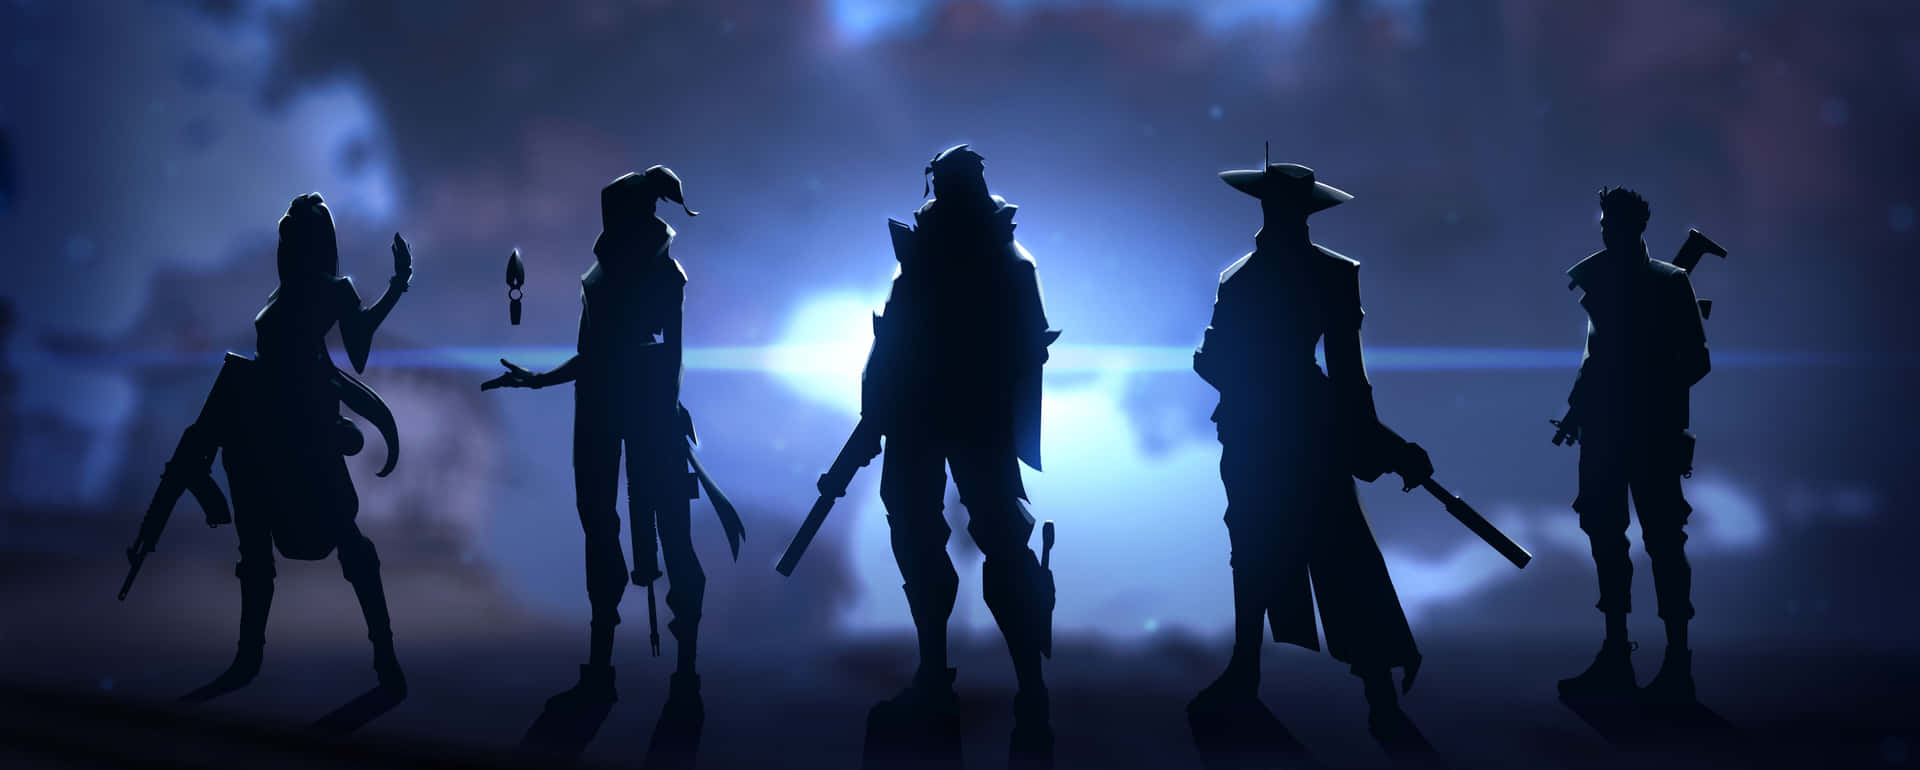 4k Hd Valorant Agents Silhouette Background